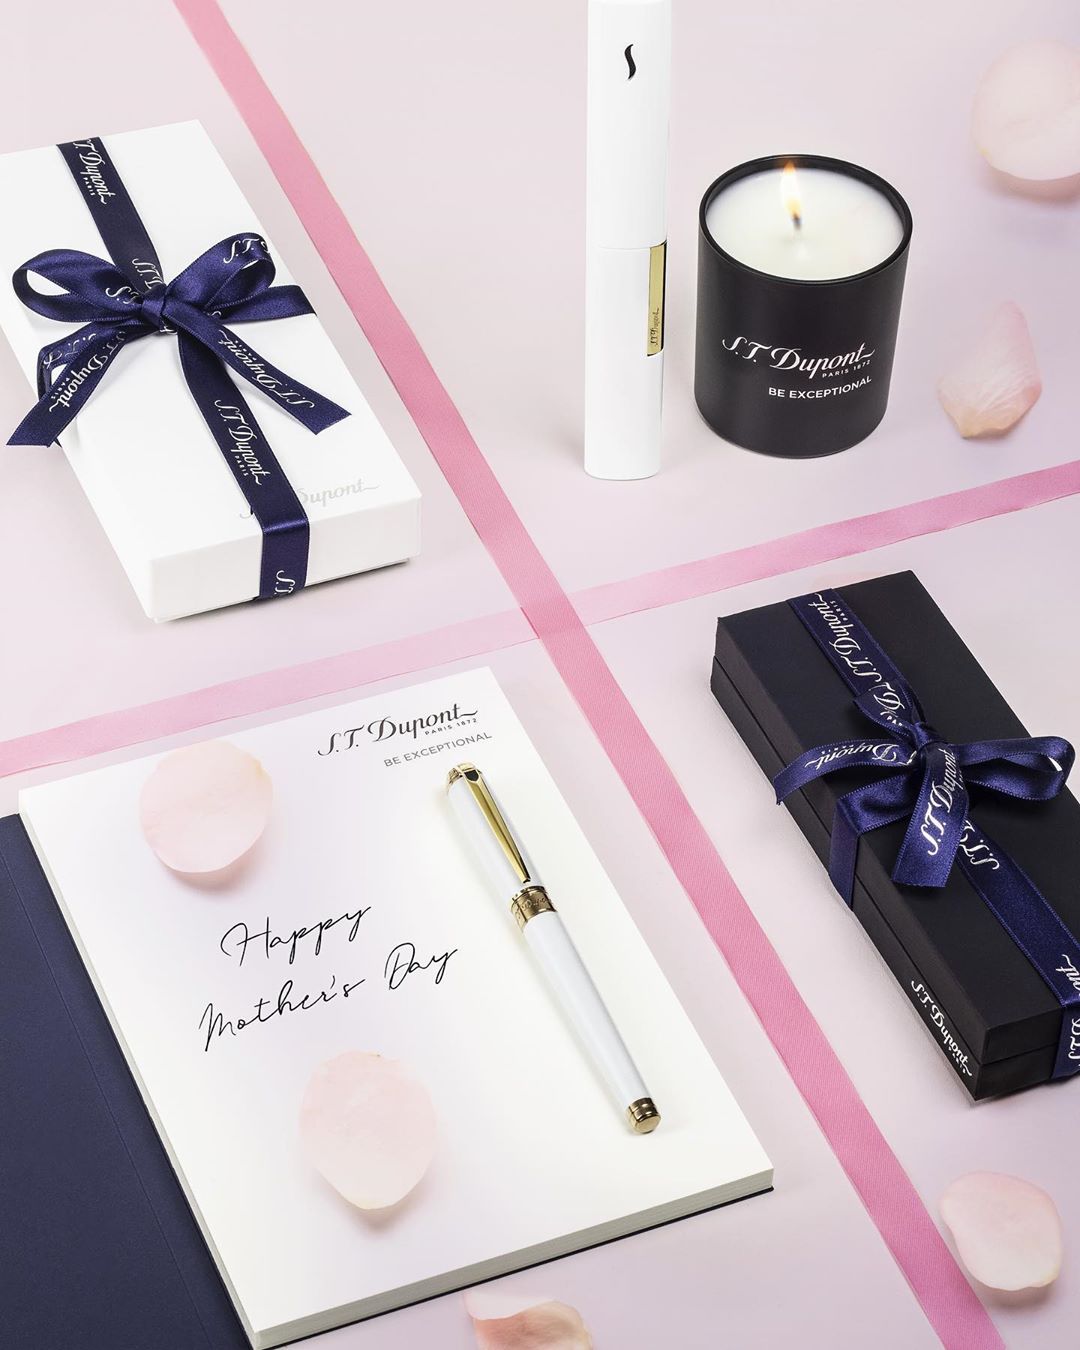 S.T. Dupont Official - Happy Mother’s Day It’s time to take care of the ones we love 
More than a mere writing instruments, S.T. Dupont pens resembles a gem that carries within it all the memories of...